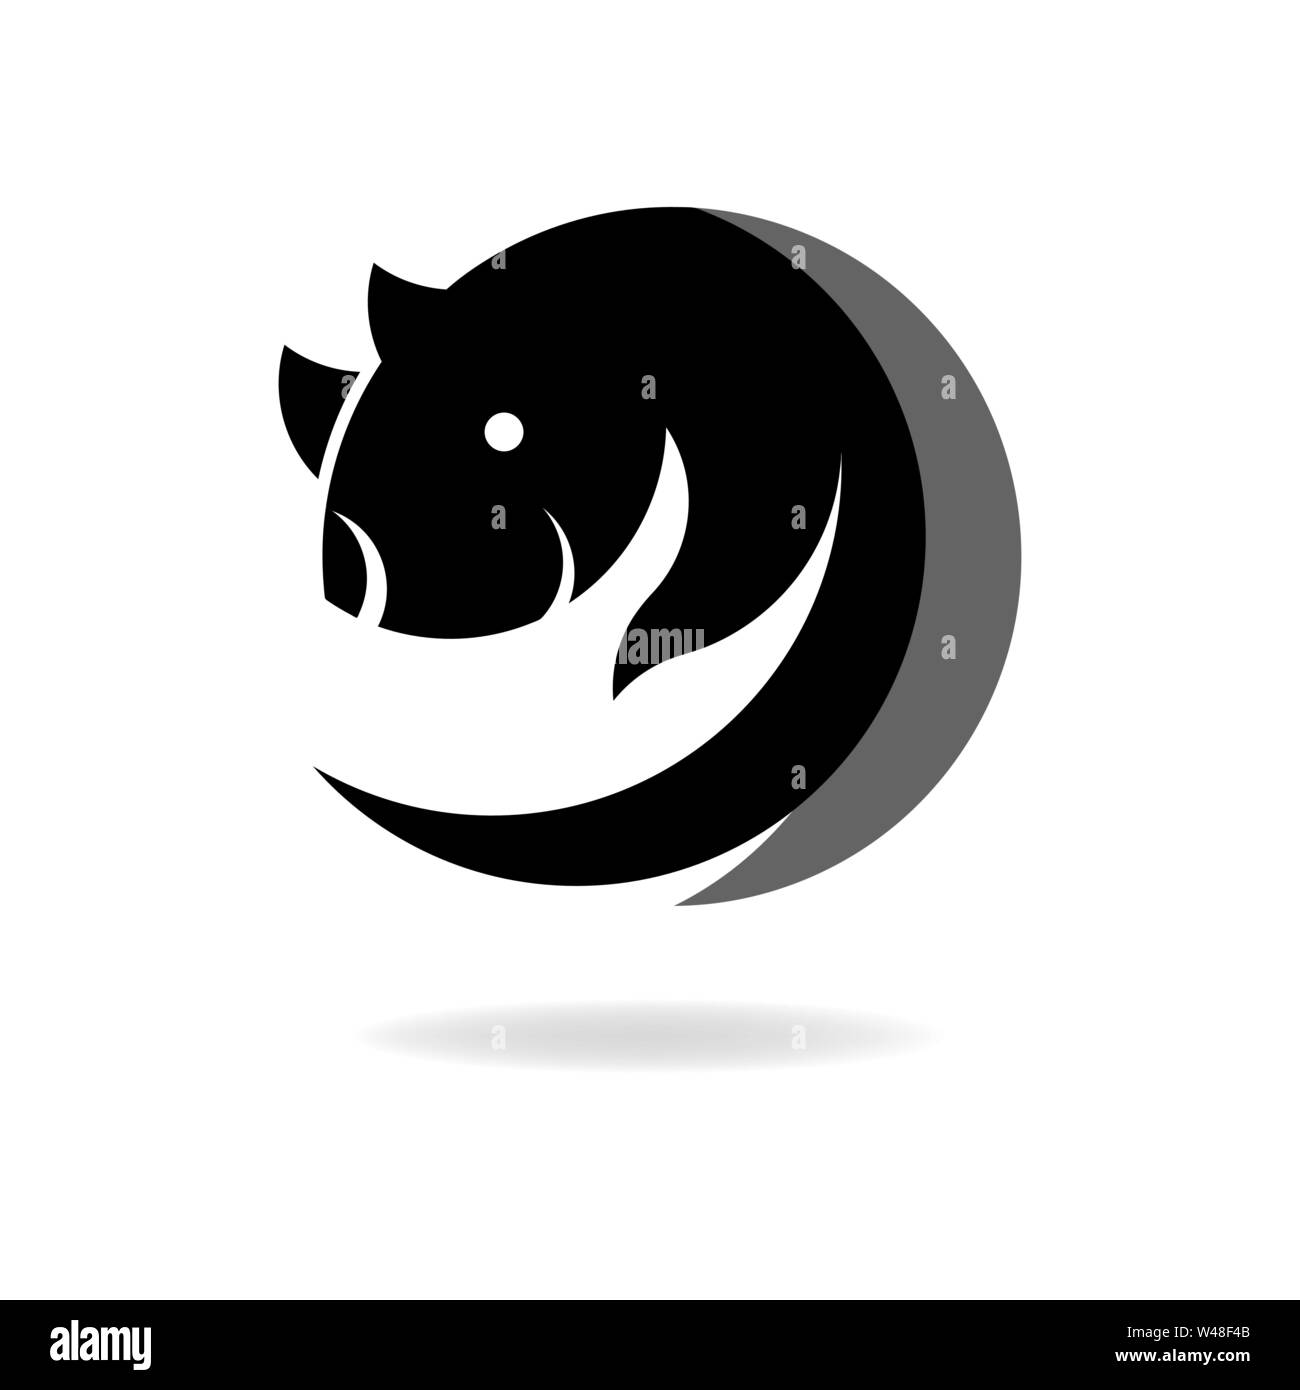 Simple shape of rat, icon or logo for web, mouse design with shadow on white background. vector illustration. Stock Vector